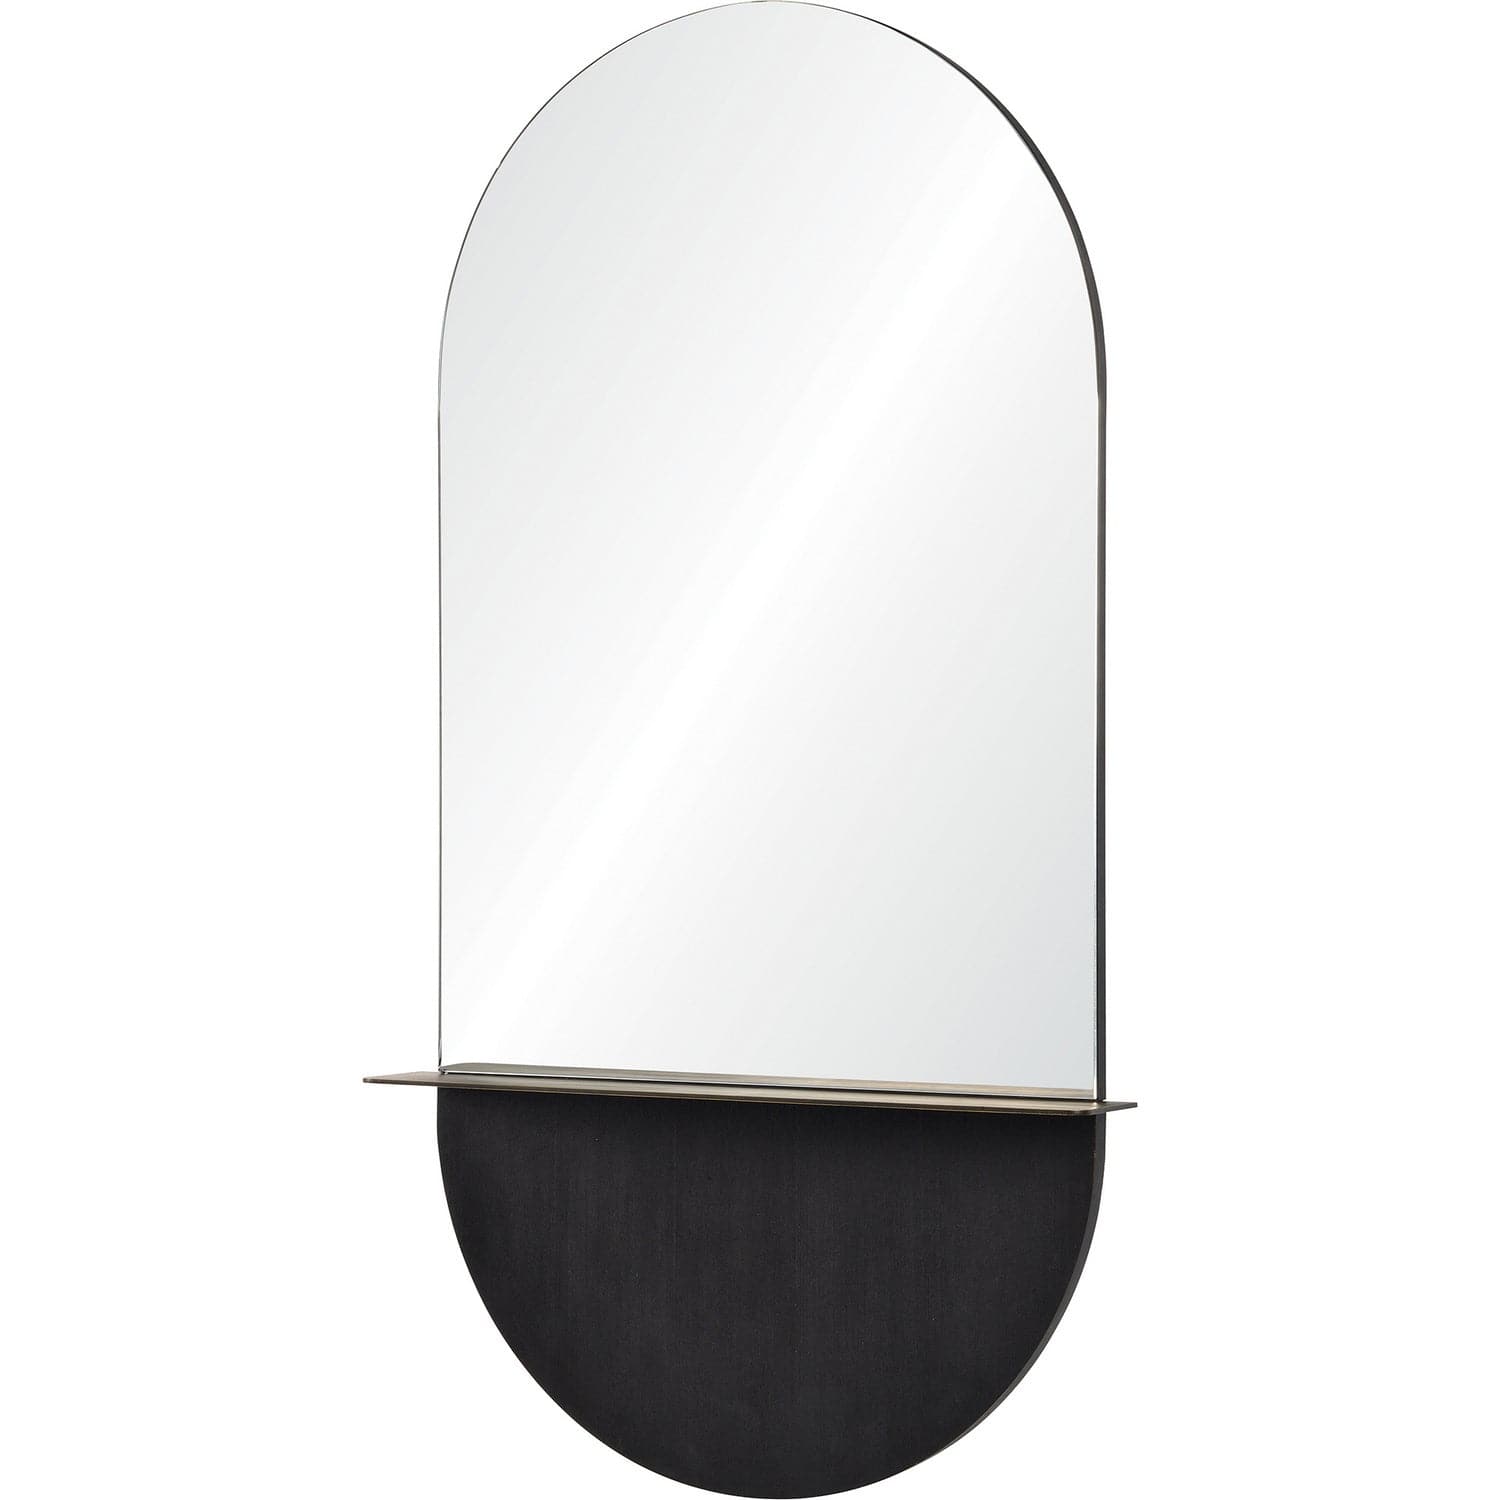 Renwil - MT2131 - Mirrors/Pictures - Mirrors-Oval/Rd.